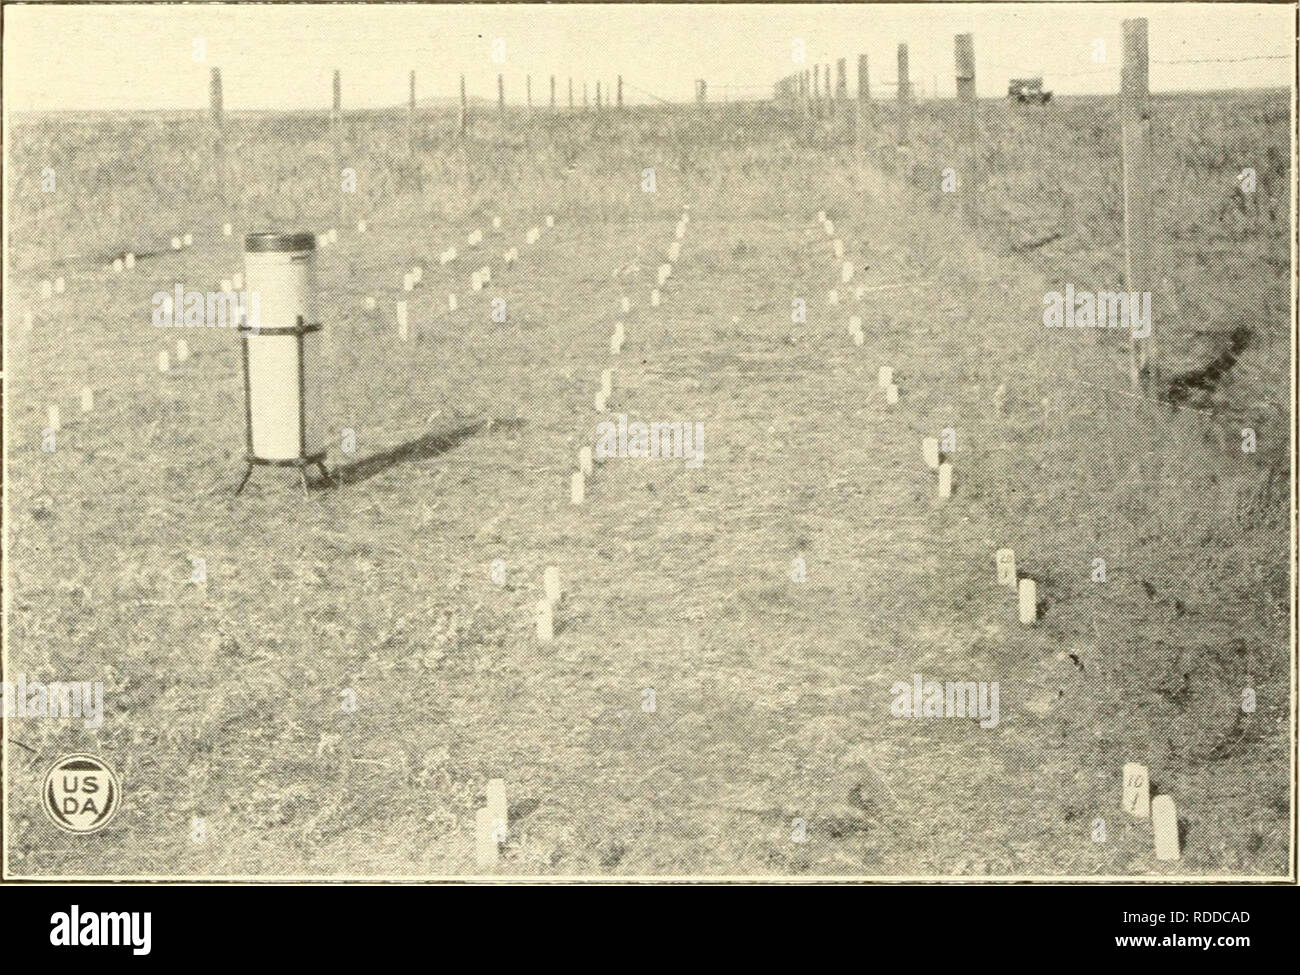 . Effects of different systems and intensities of grazing upon the native vegetation at the Northern Great Plains Field Station. Grazing; Forage plants; Agricultural systems. Fig. I.—Close View of a Single Plant of Artemisia frigida in the 30-Acre Pasture. Tin plani was in inches tall and had 36 flower stalks. This aff&lt; rds an idea of the size a single planl may attain. June, L920.. Fig. 2.—View of the Clipped Quadrats in the Isolation Transect of THE 100-ACRE PASTURE. The quadrat cut every 10 days is in the foreground. The duplicates are on the left. October, 191«J.. Please note that these Stock Photo